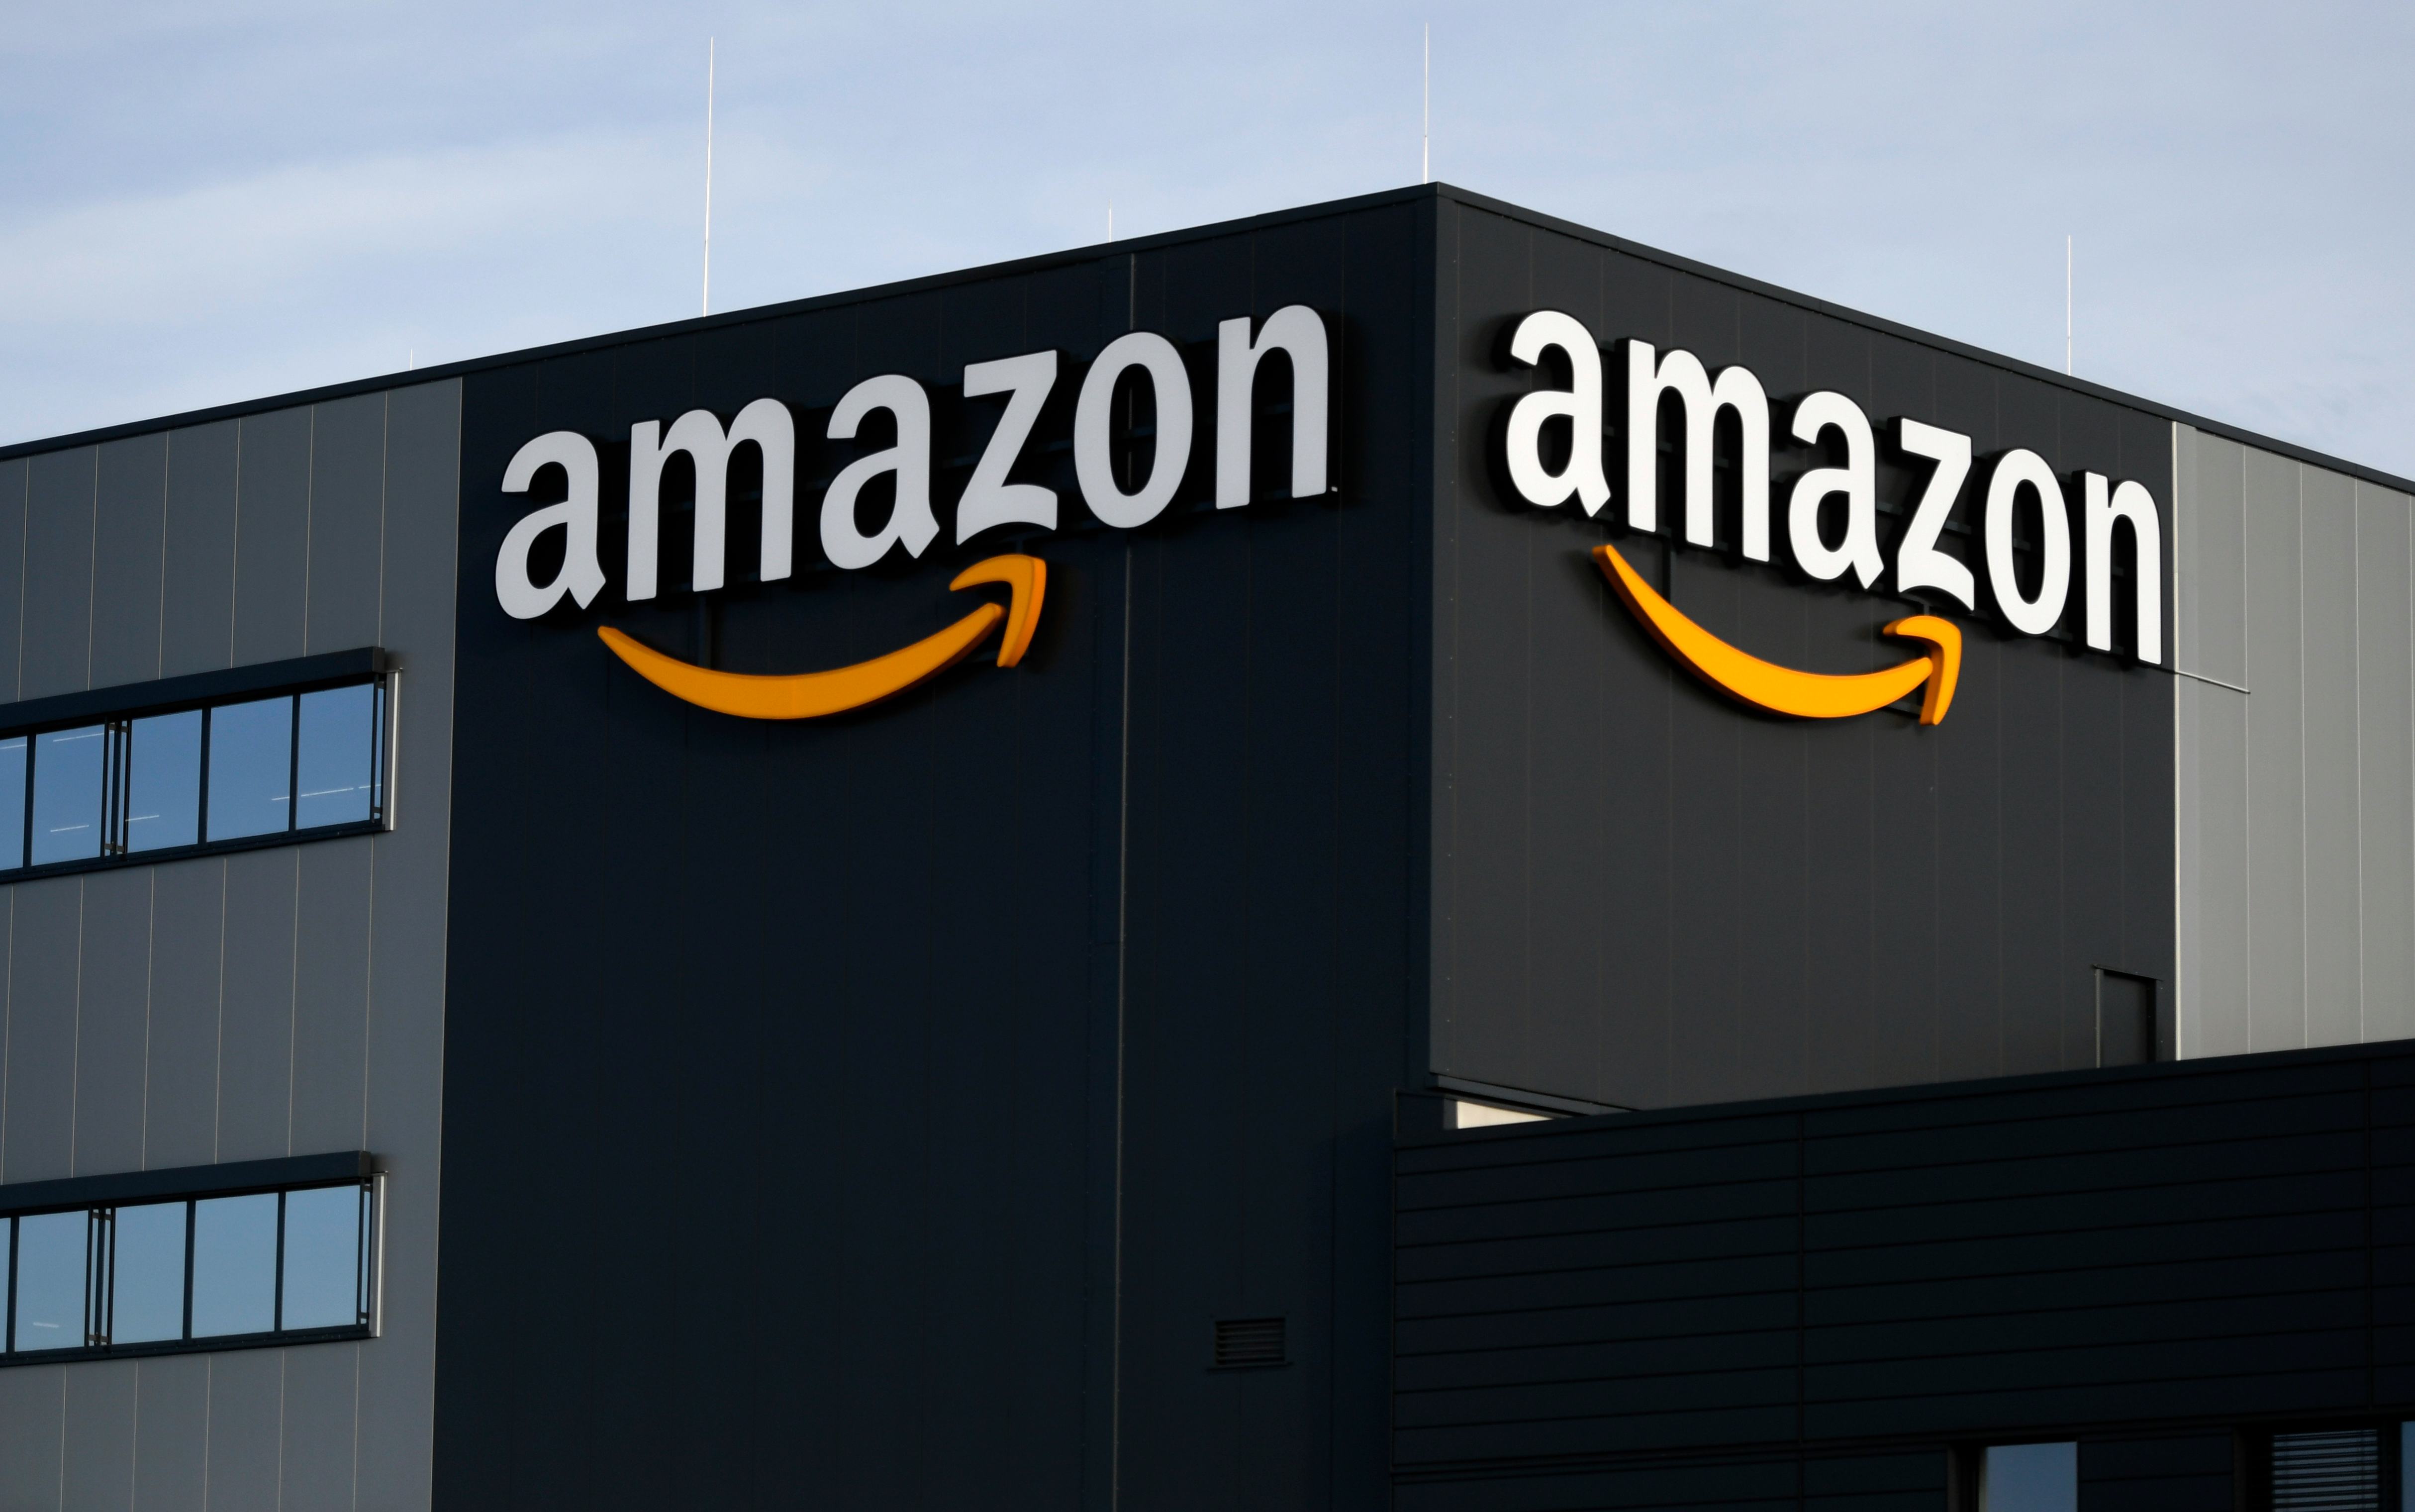 Technology stocks one after another came "good news"! Amazon Q1 net profit year-on-year turnaround AWS, advertising business into a "pillar."